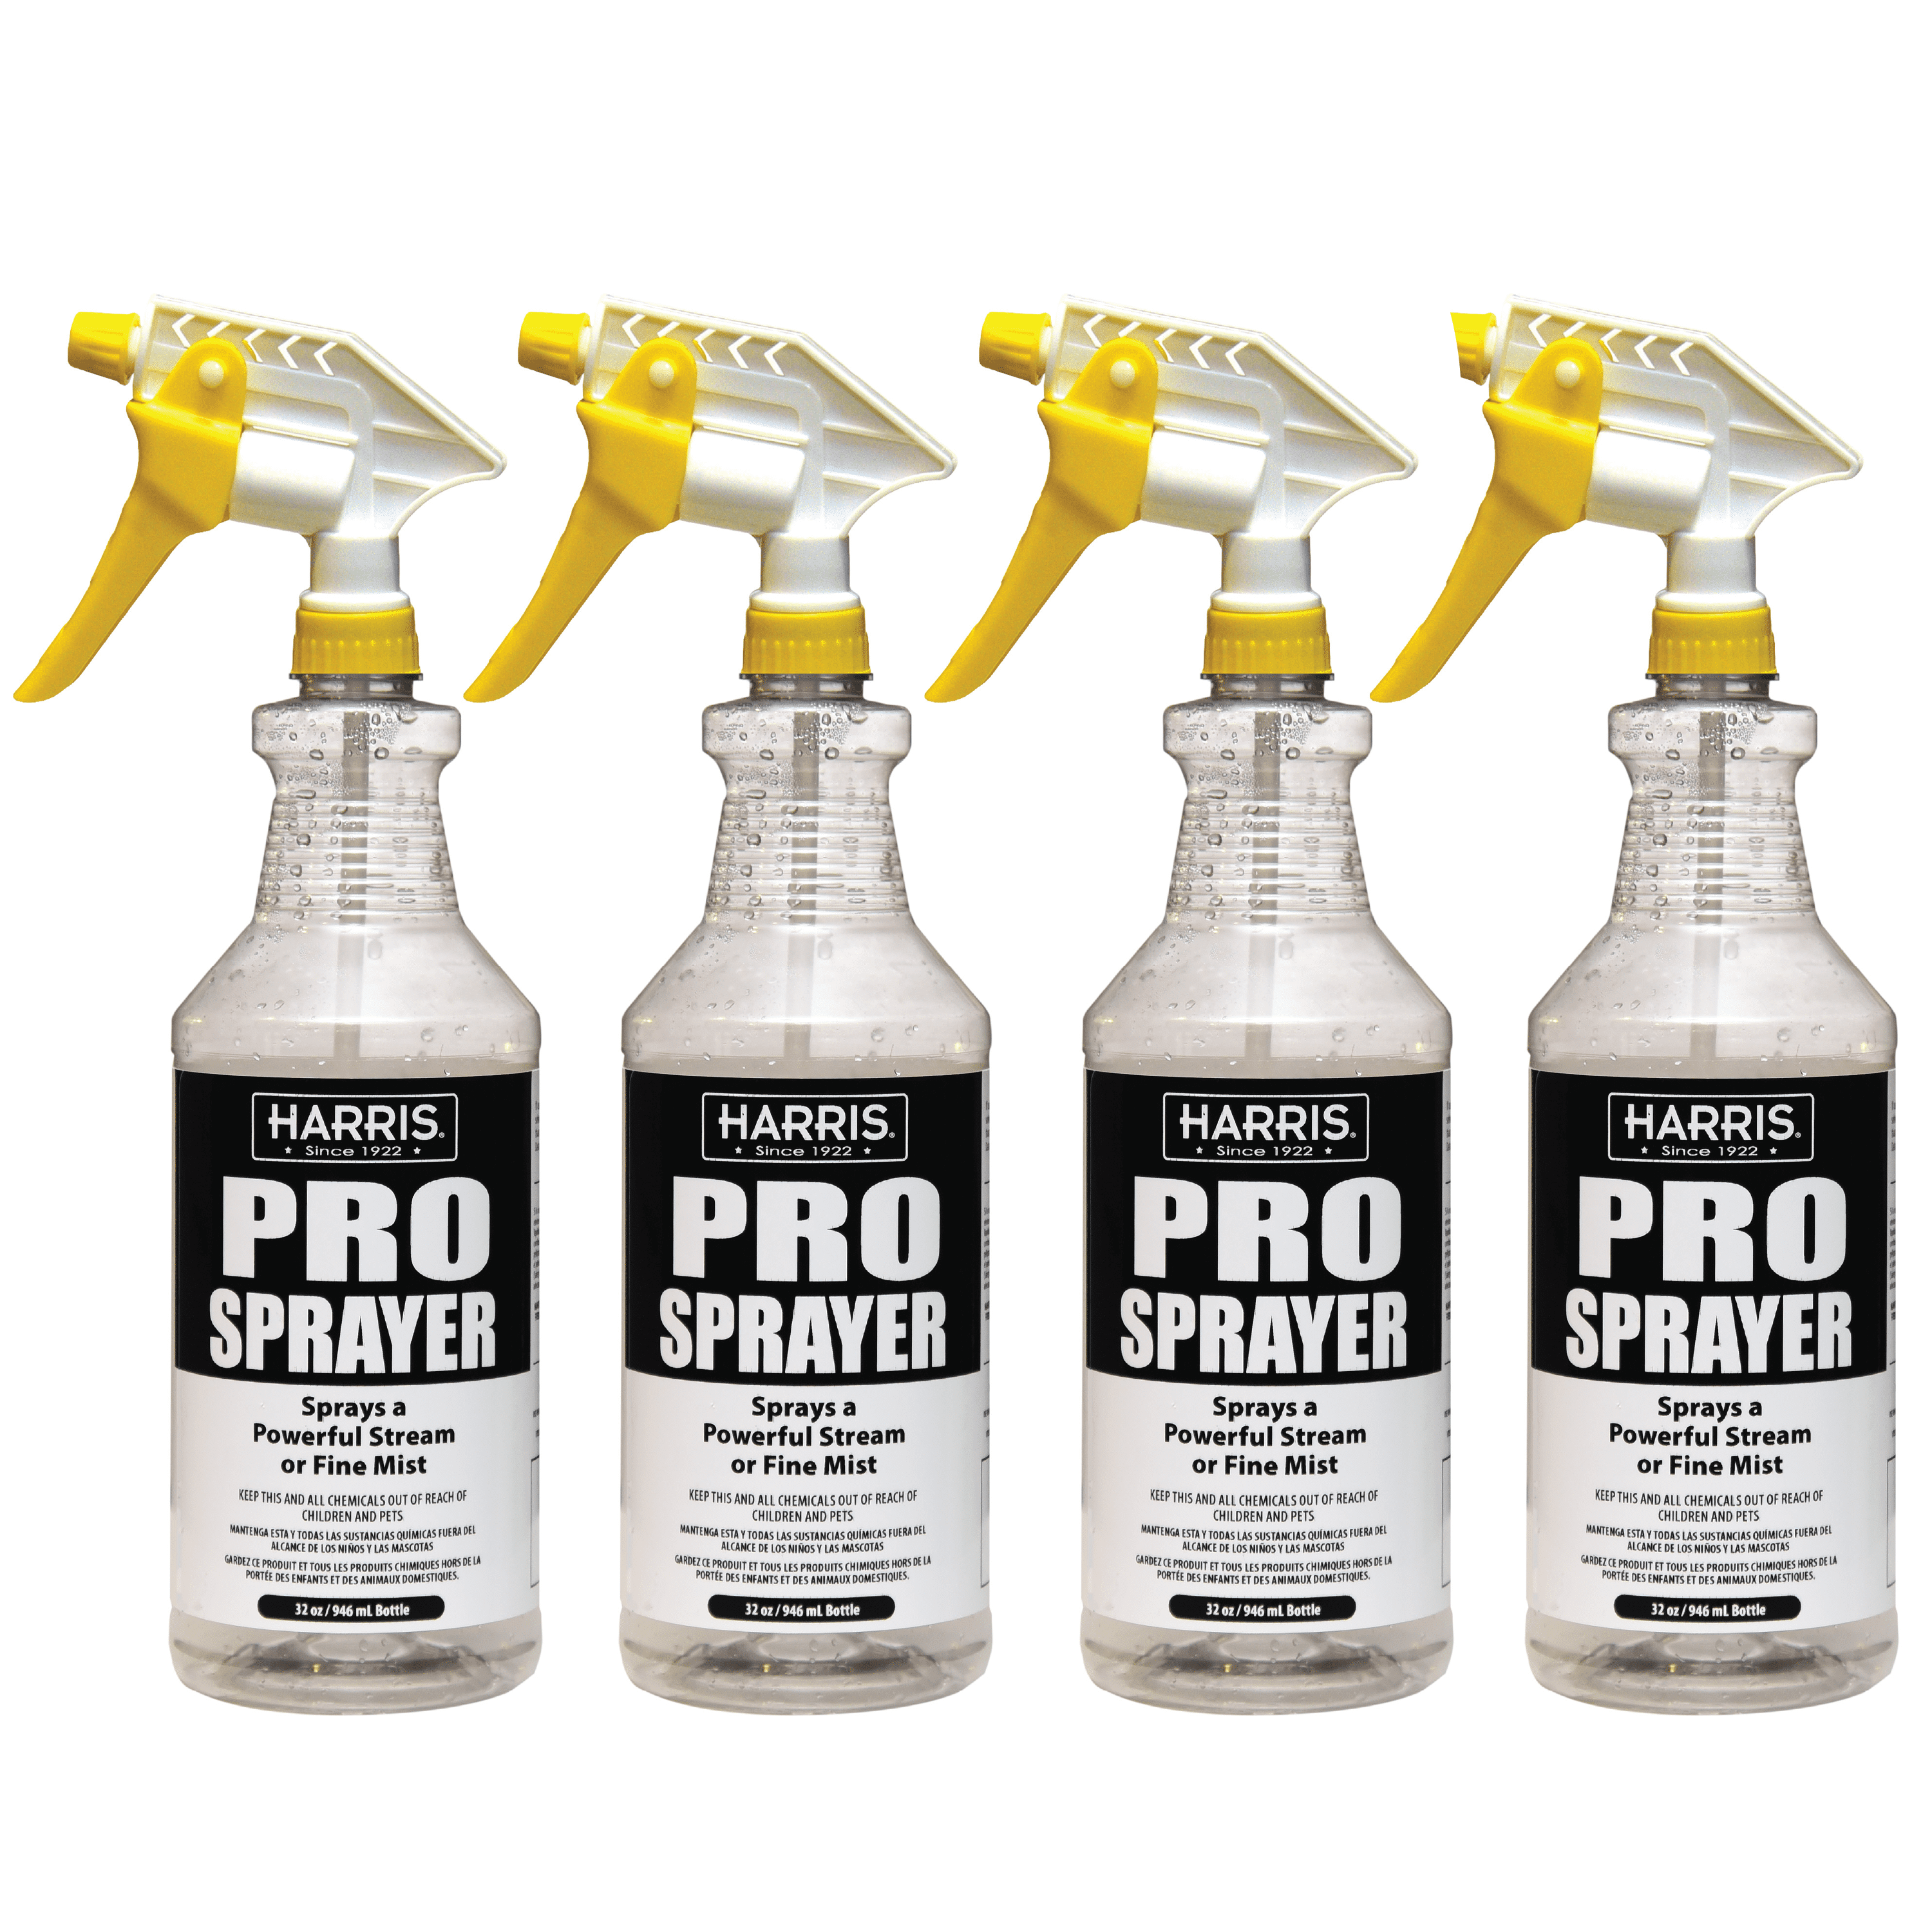 HARRIS Chemically Resistant Professional Spray Bottle, 32oz 1-Pack .0 3  Count